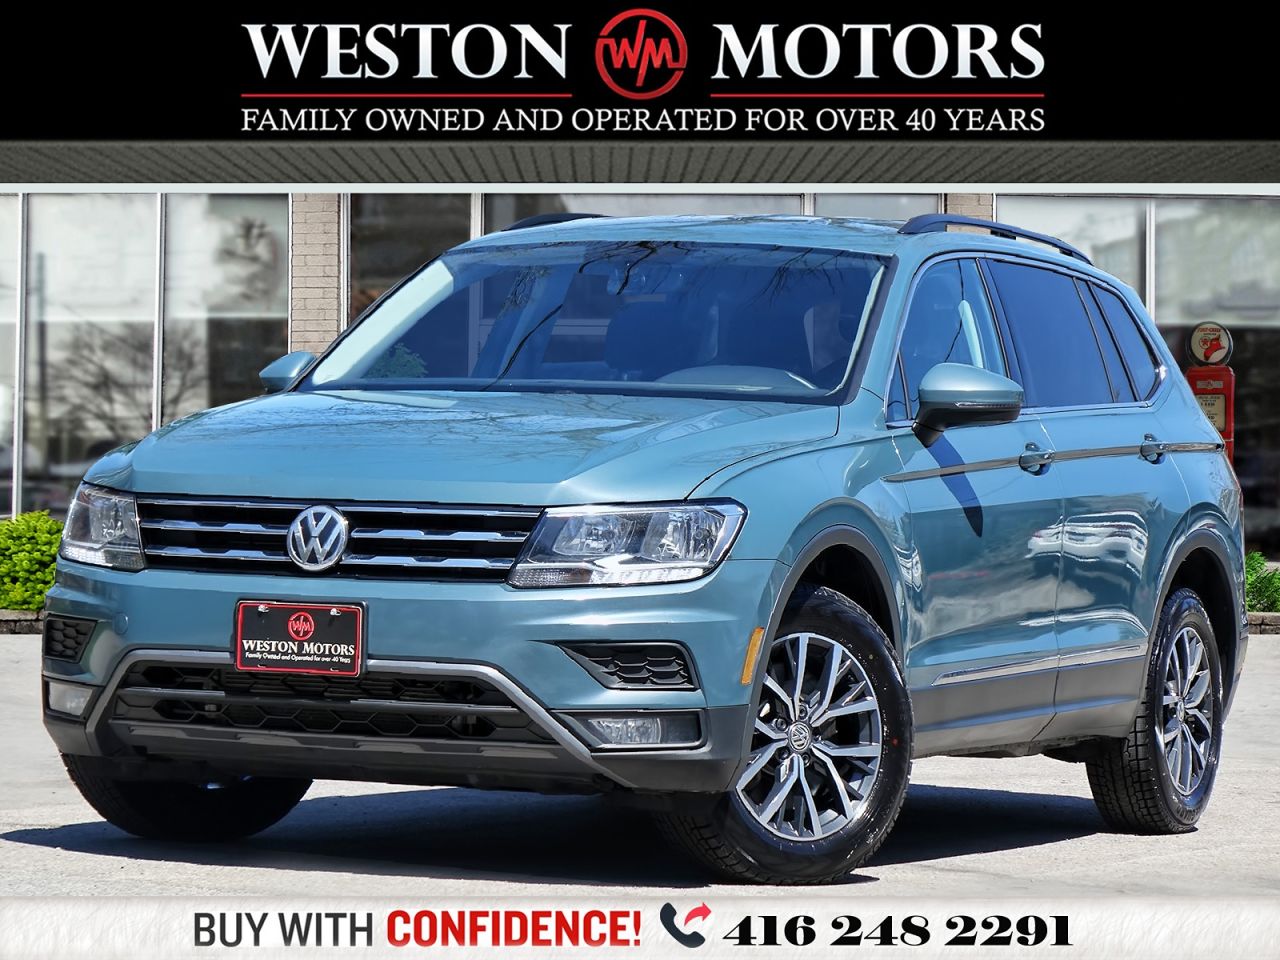 2021 Volkswagen Tiguan *COMFORTLINE*4MOTION*AWD*LEATHER*HEATED STS*REVCAM